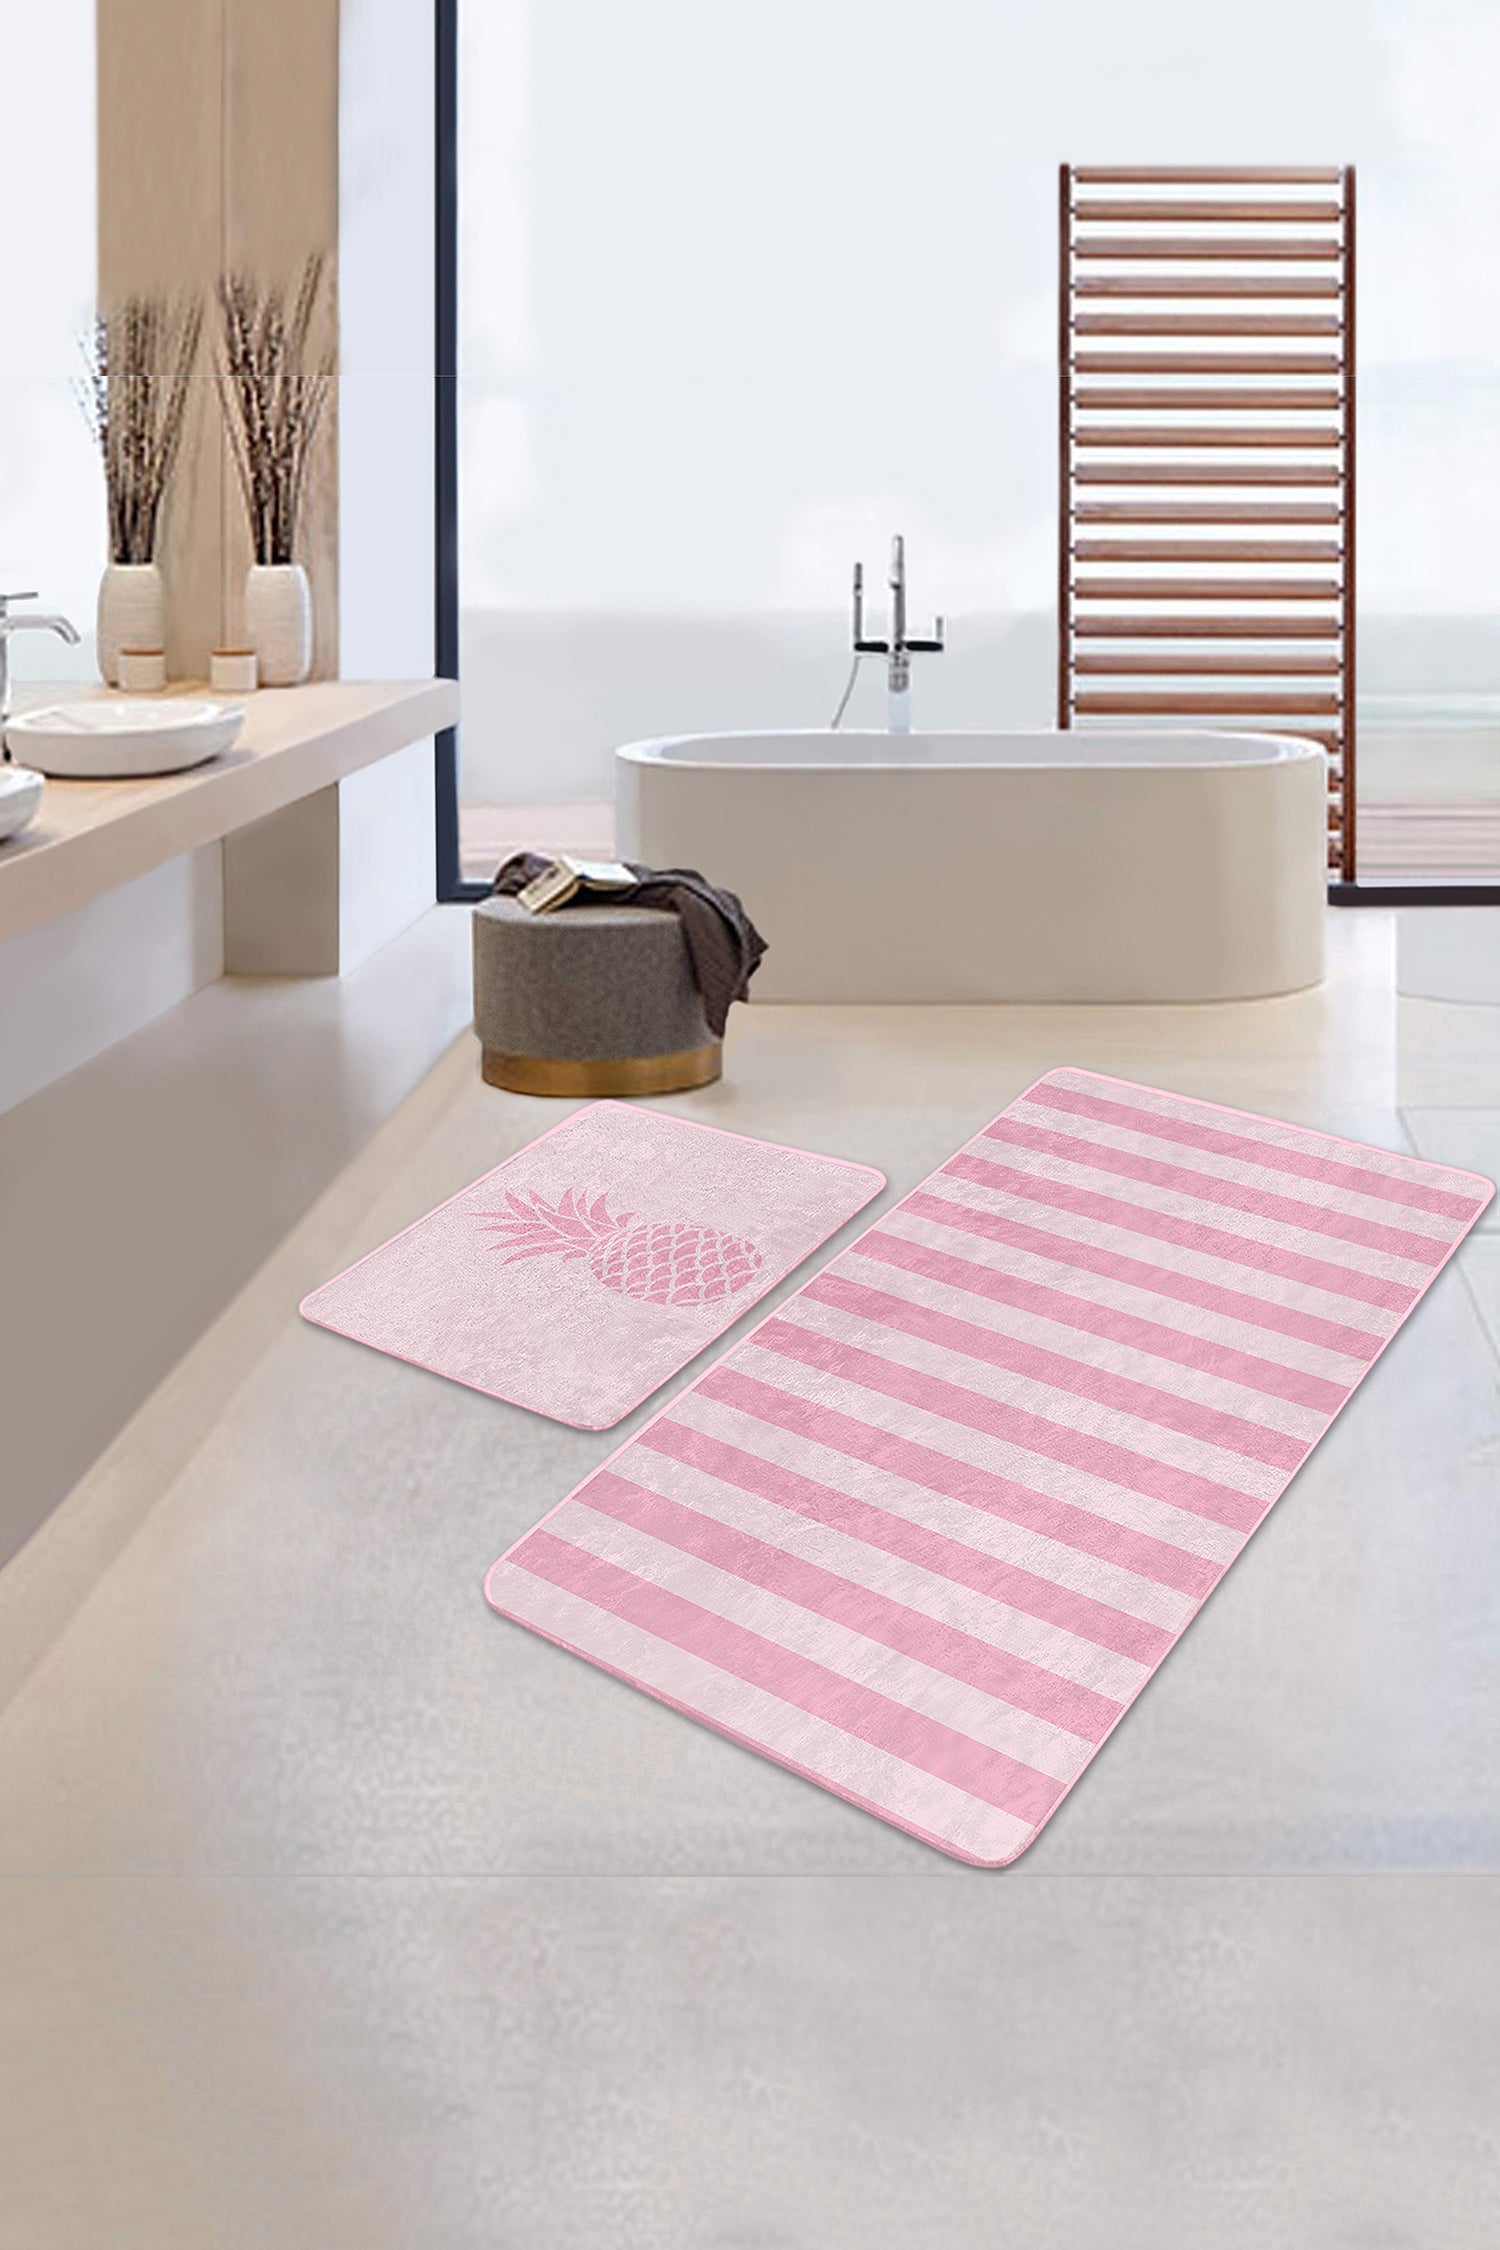 Decorative Bath Mat Set with a Charming Array of Pink Pineapple Patterns